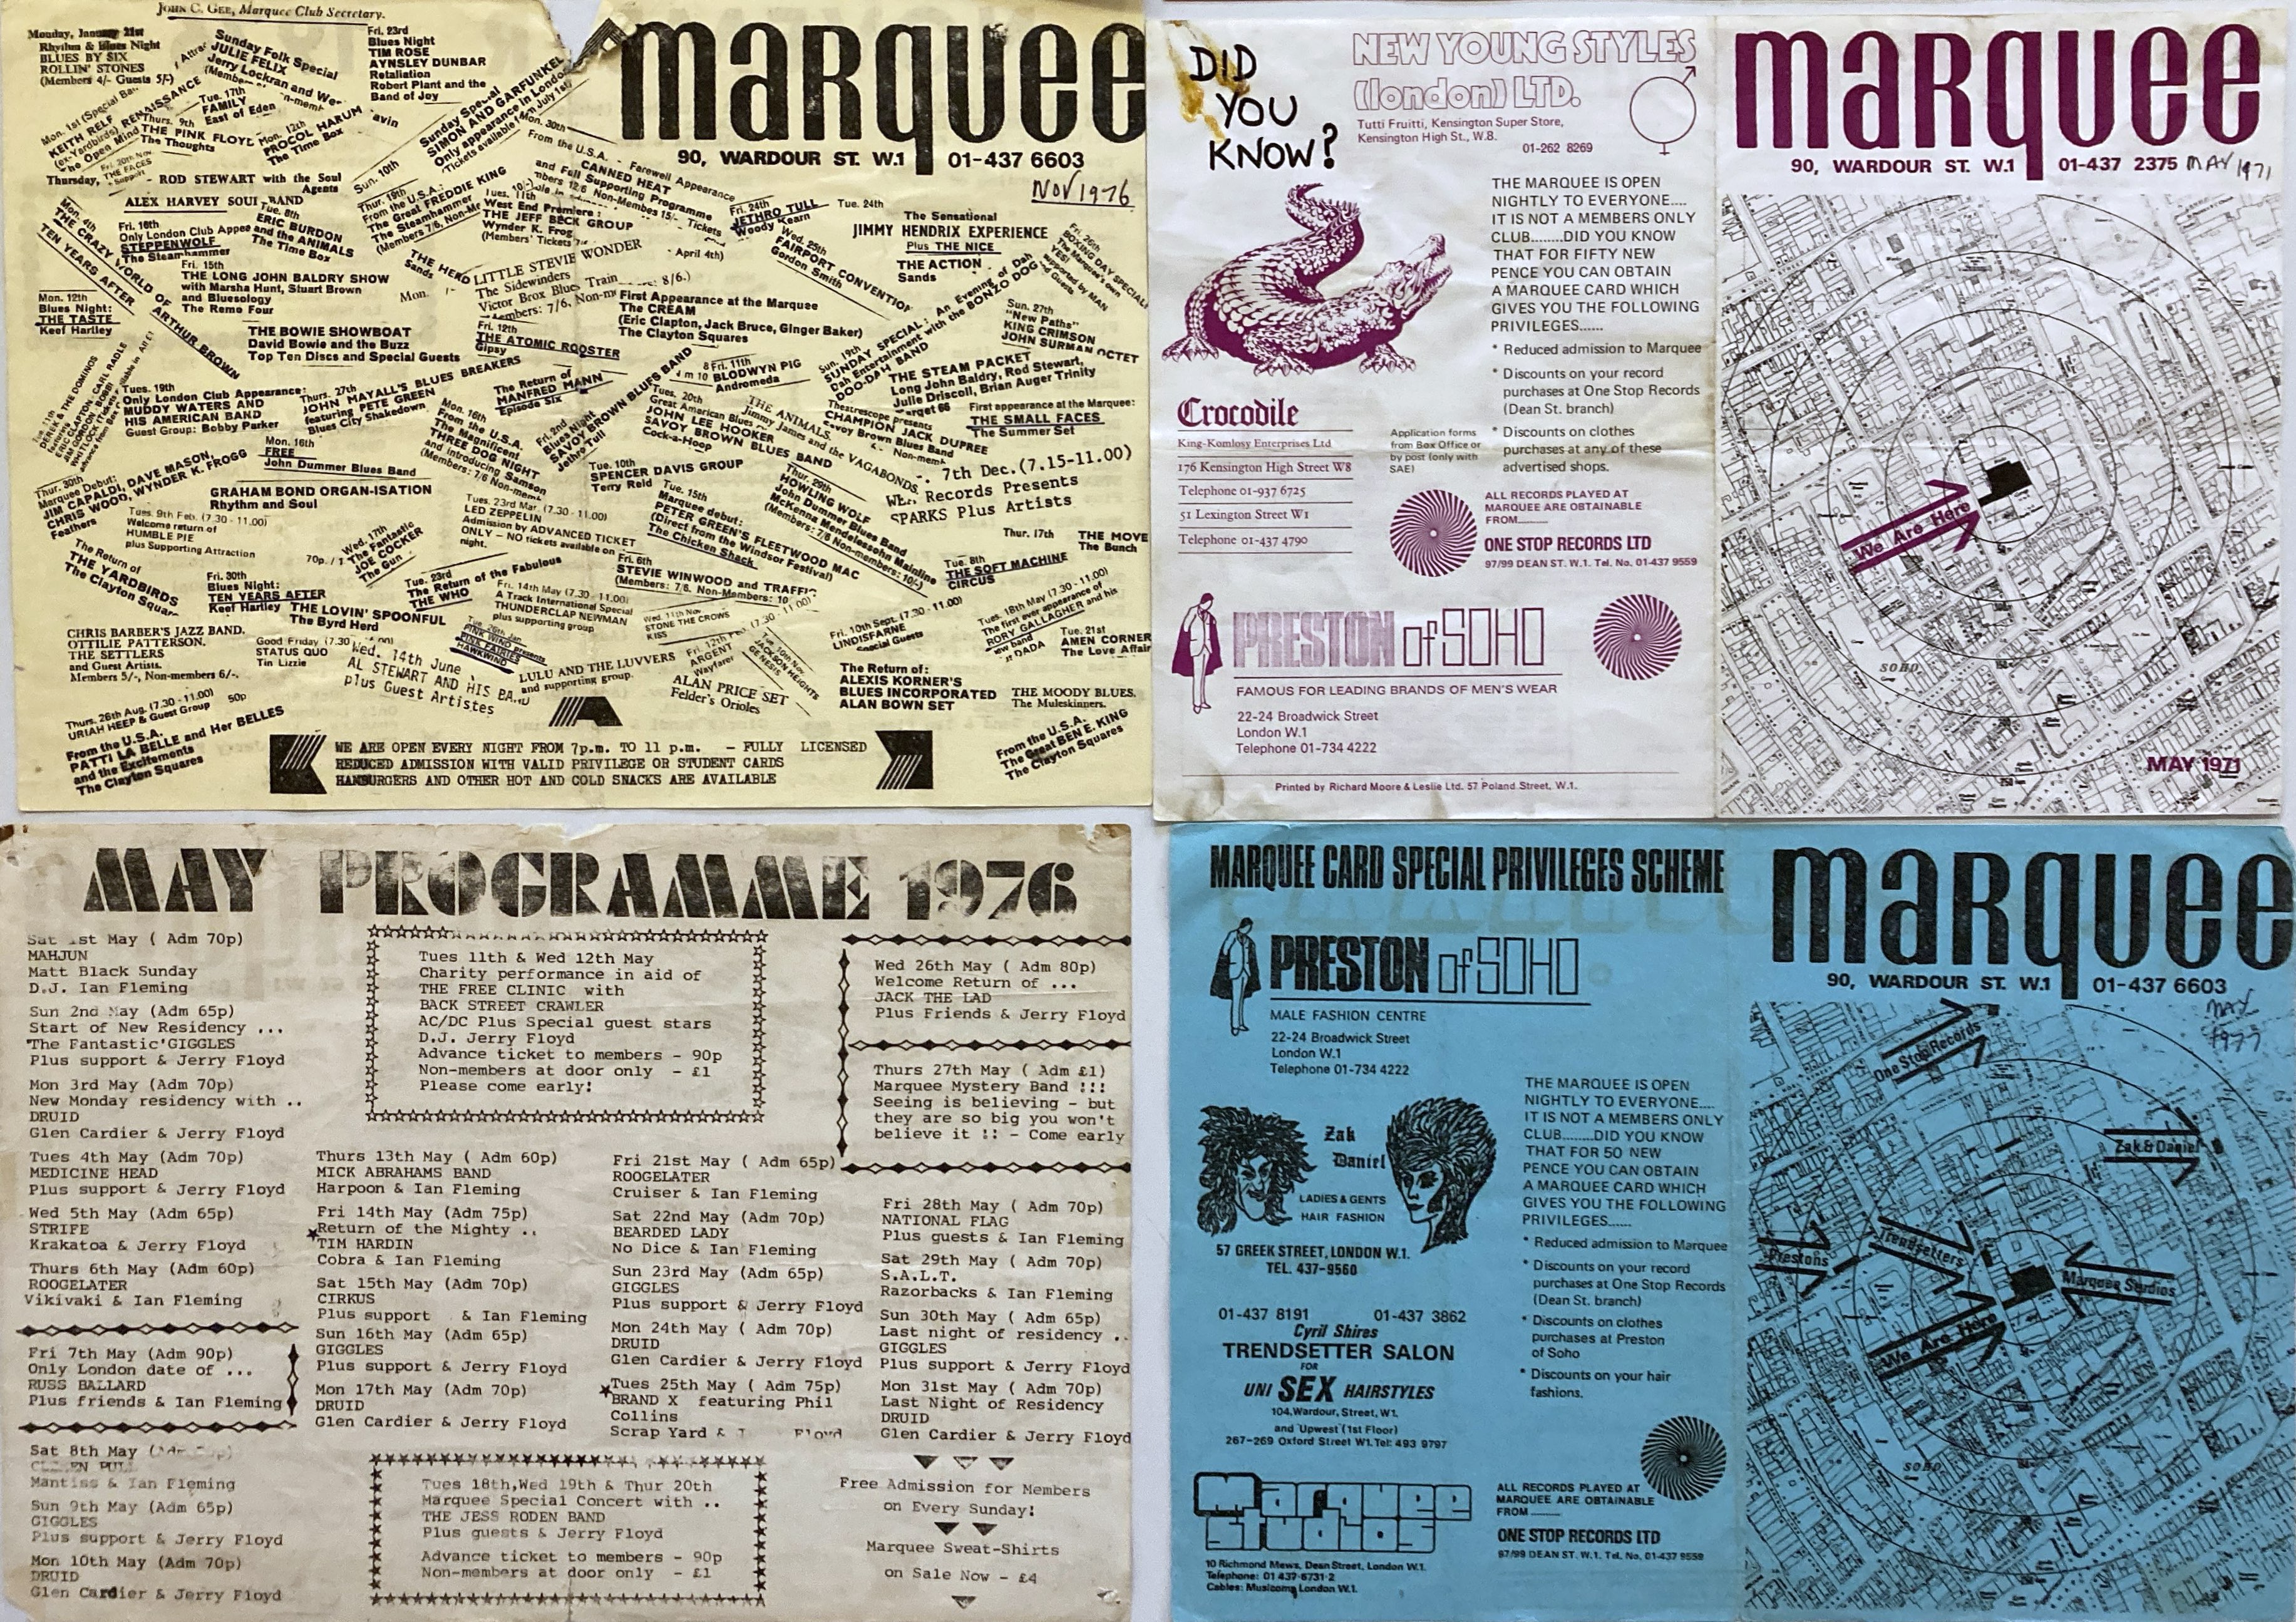 1970's Monthly Promotional Flyers for the Marquee Club Soho London